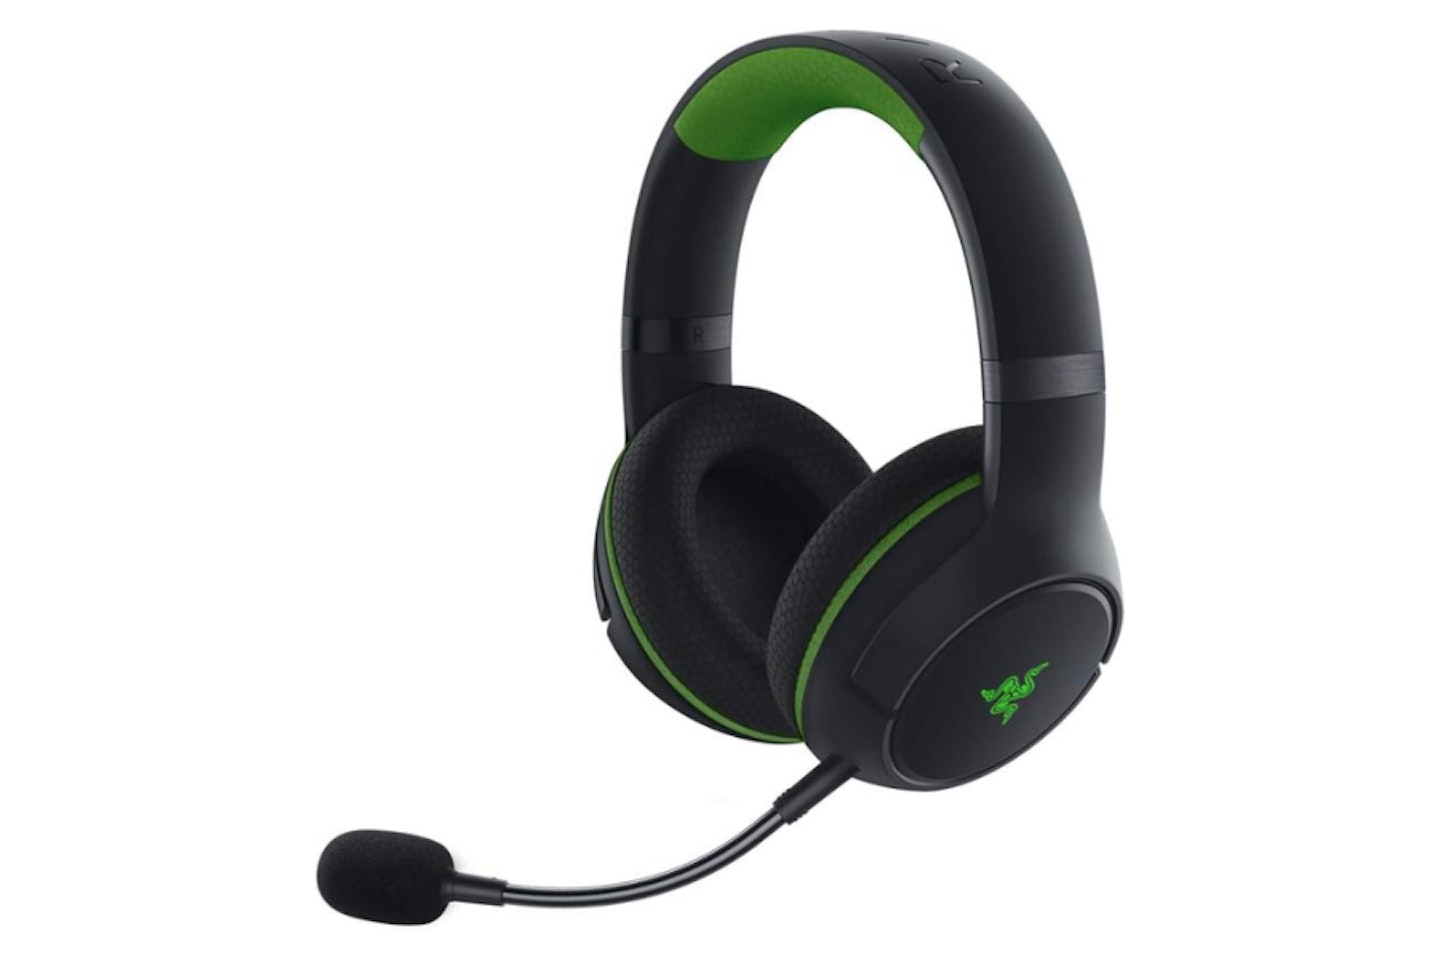 Razer Kaira Pro - Wireless Headset for Xbox Series X  - one of the best gifts for gamers